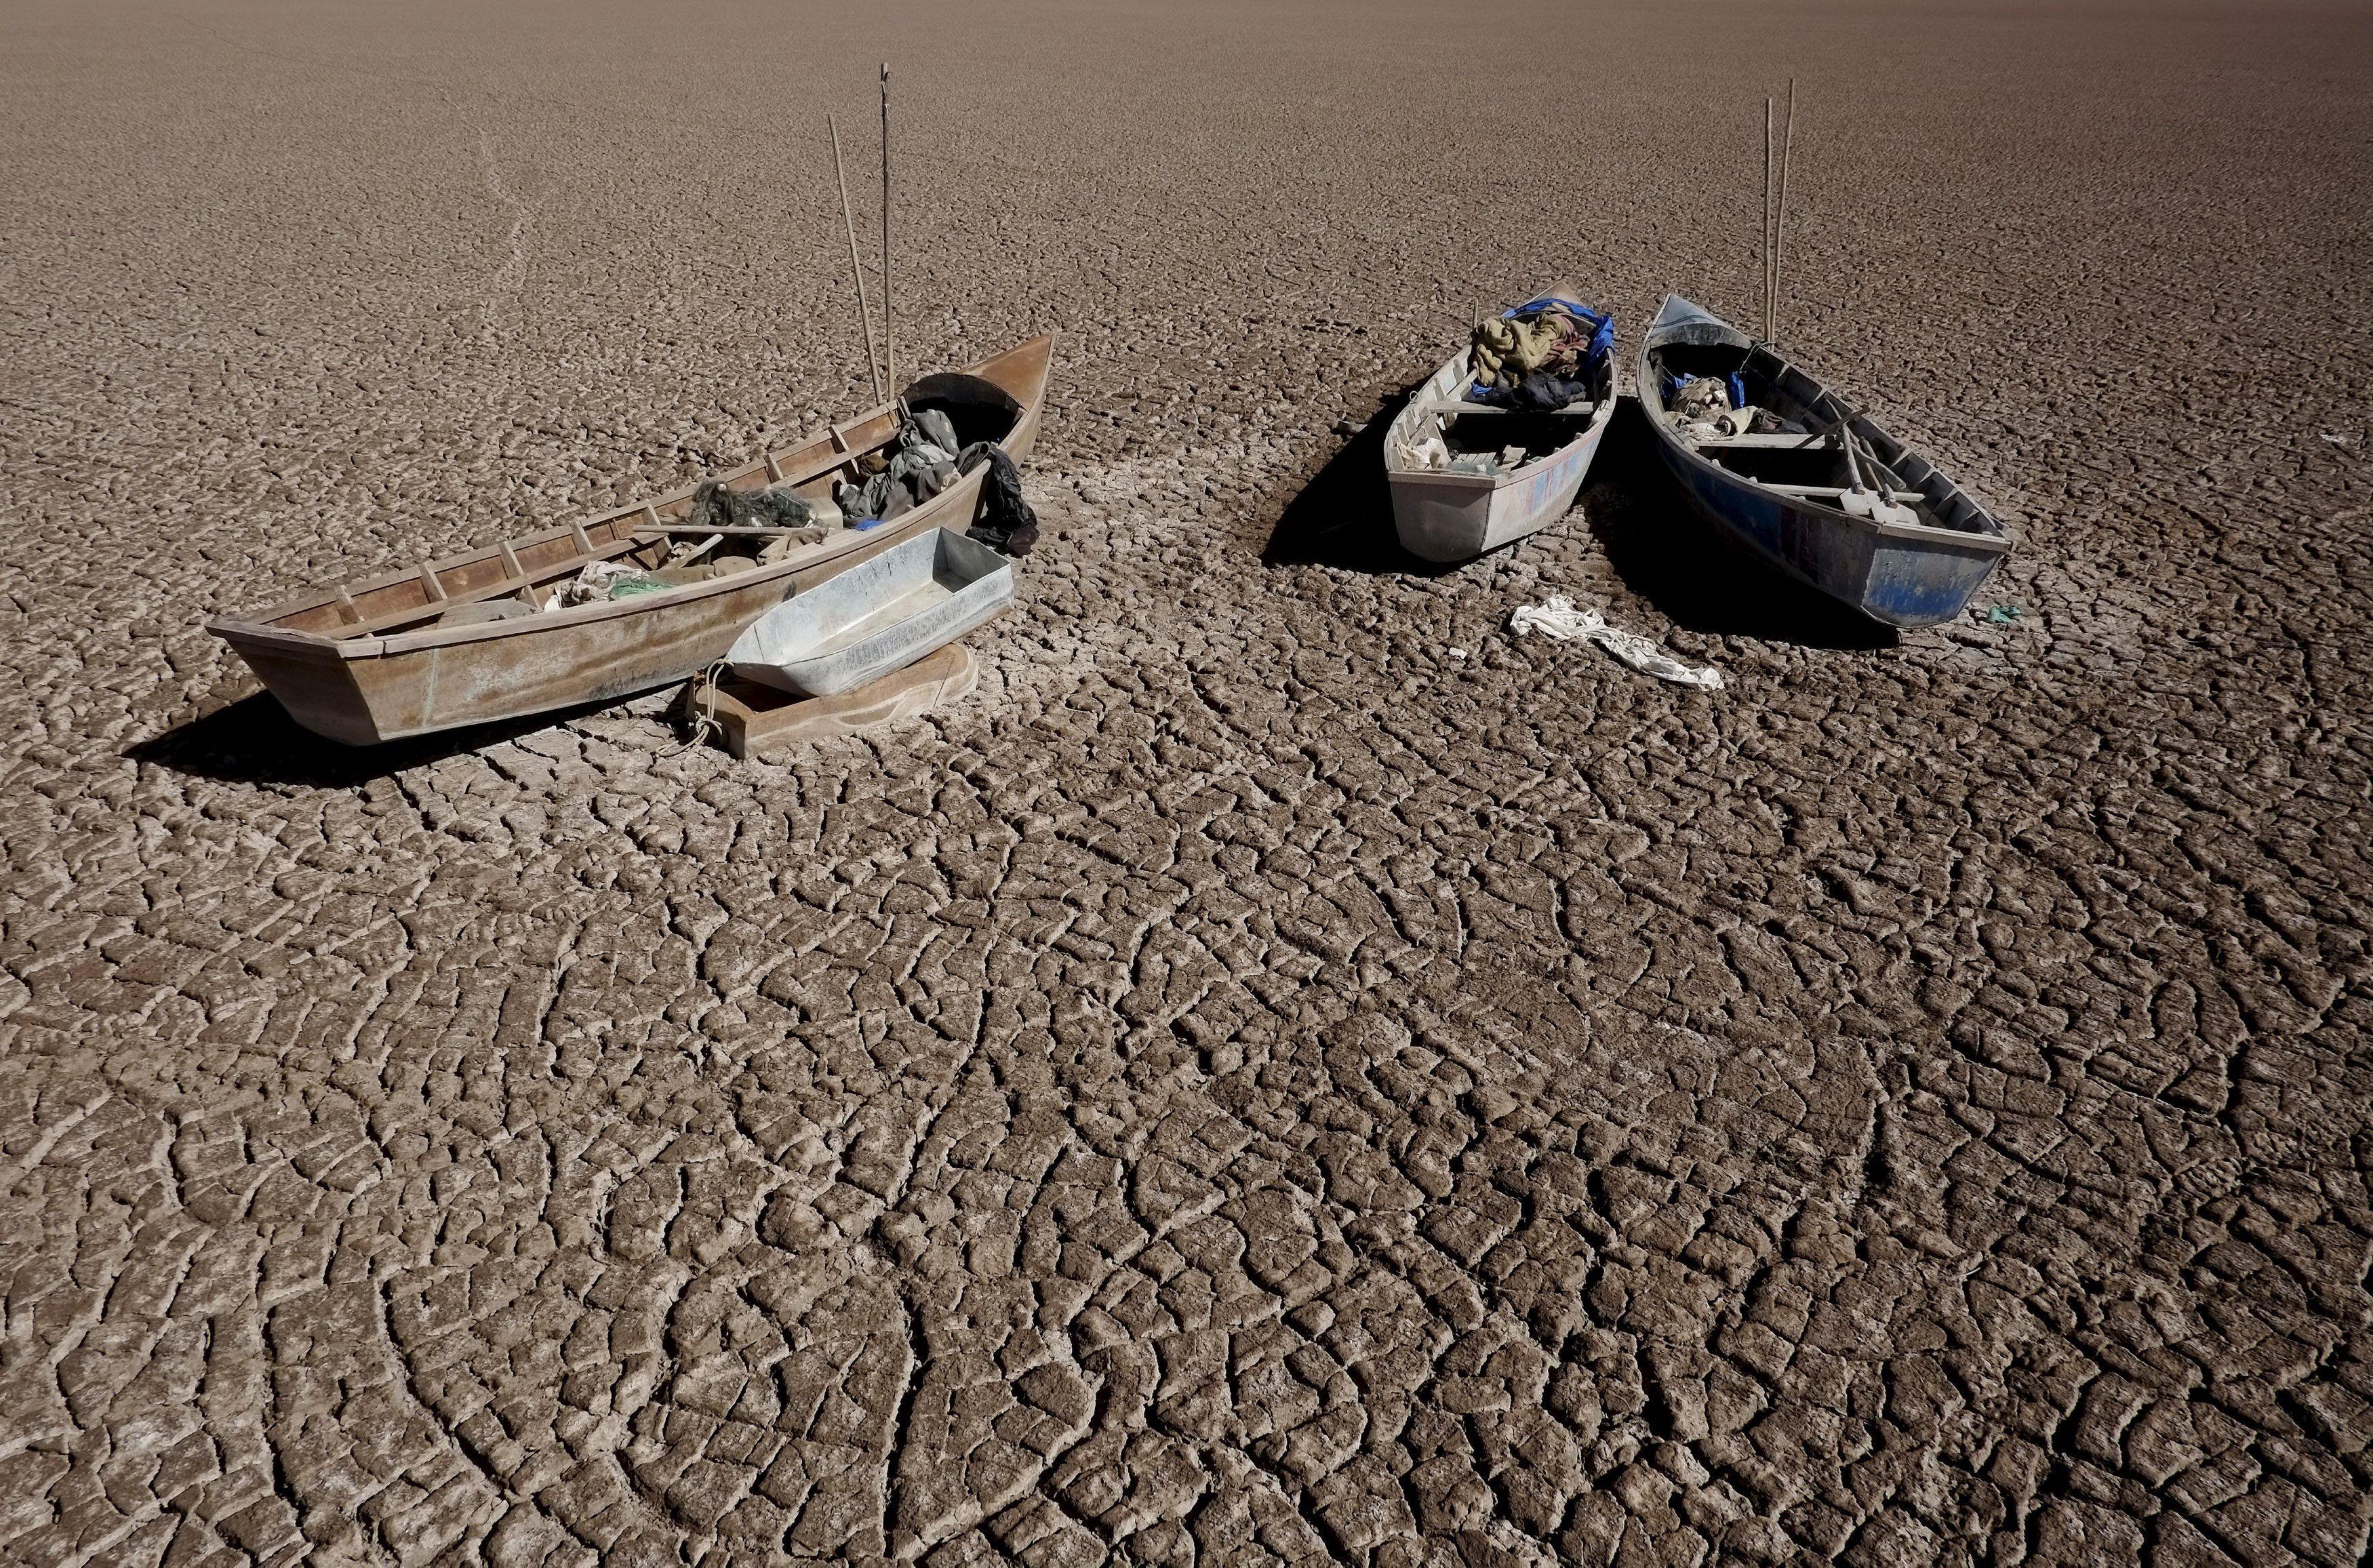 Boats of fishermen are seen on the dried Poopo lakebed in the Oruro Department, south of La Paz